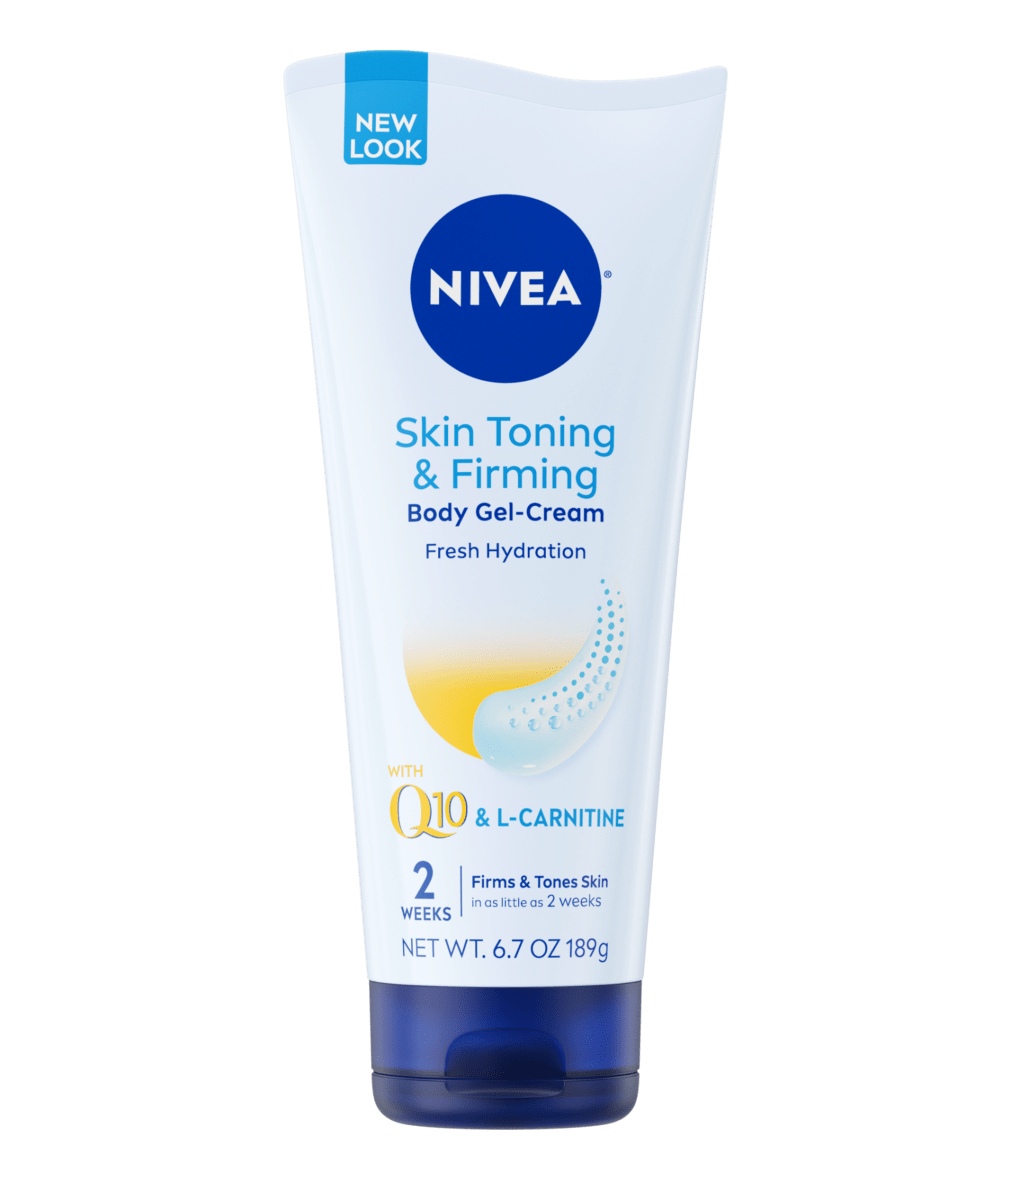 Body Firming and Toning Cream